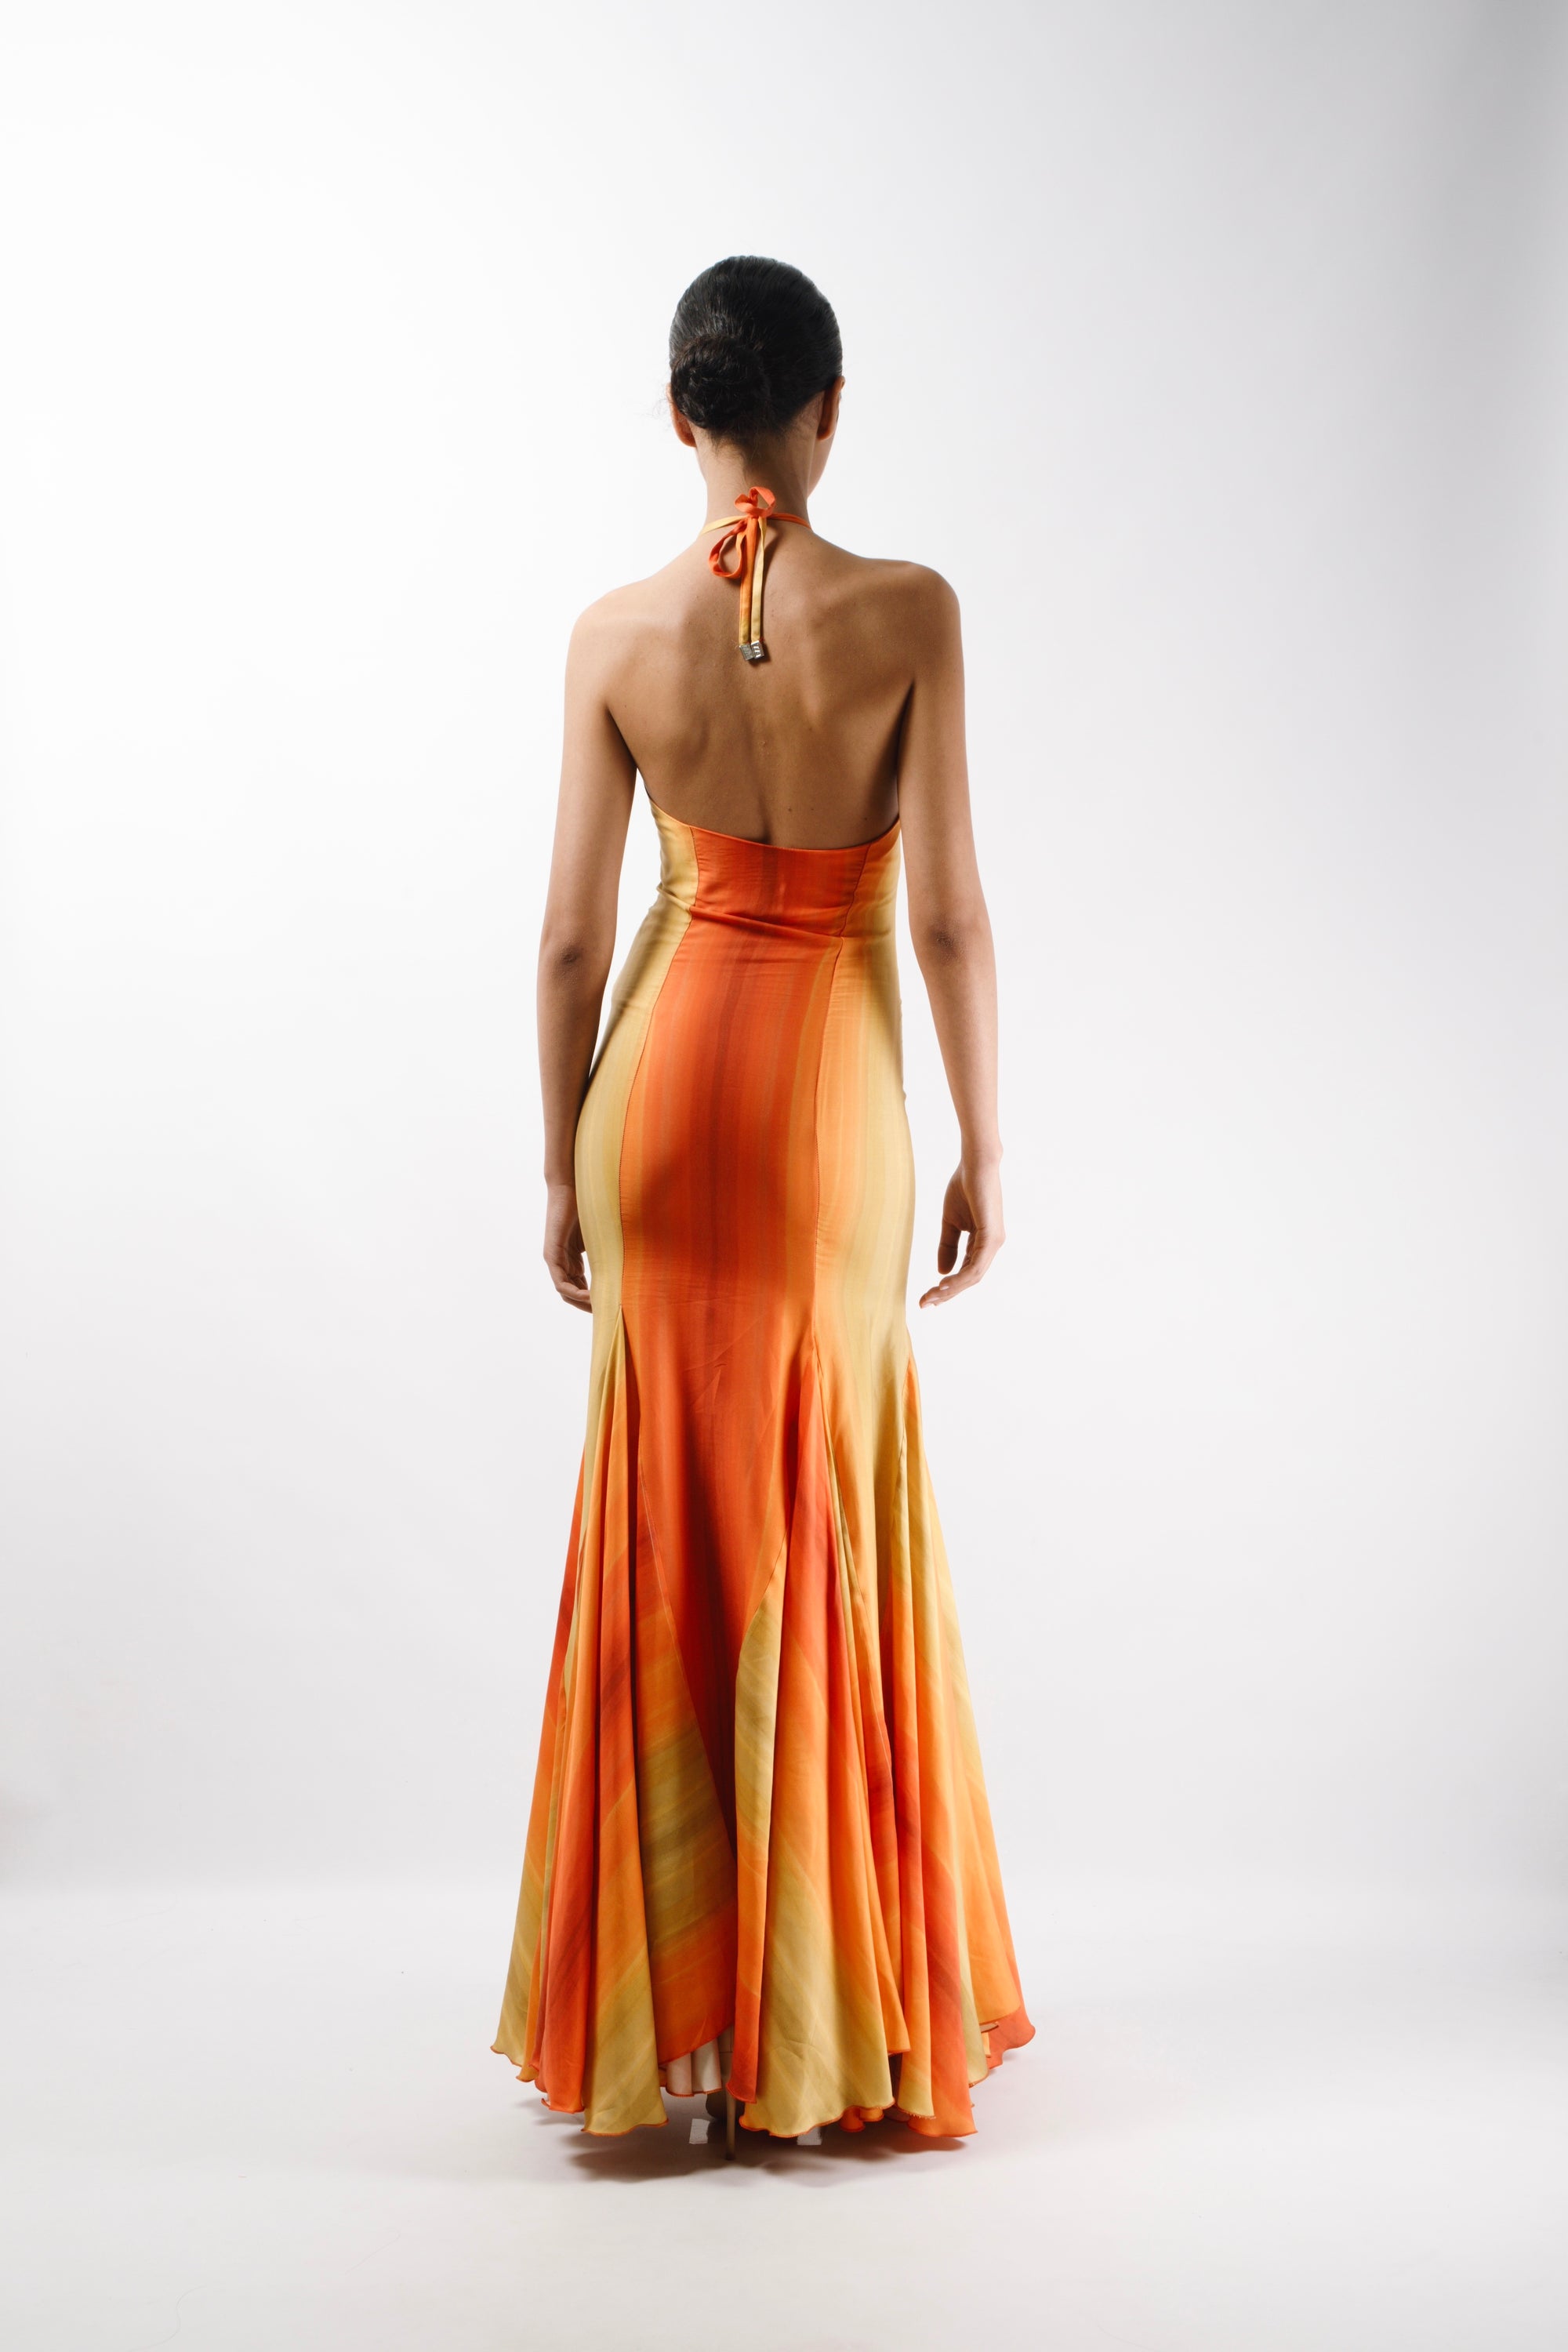 Maxi Gown Dress with long triangle godets and an American neckline with self tie straps. The Dress features an open back - back